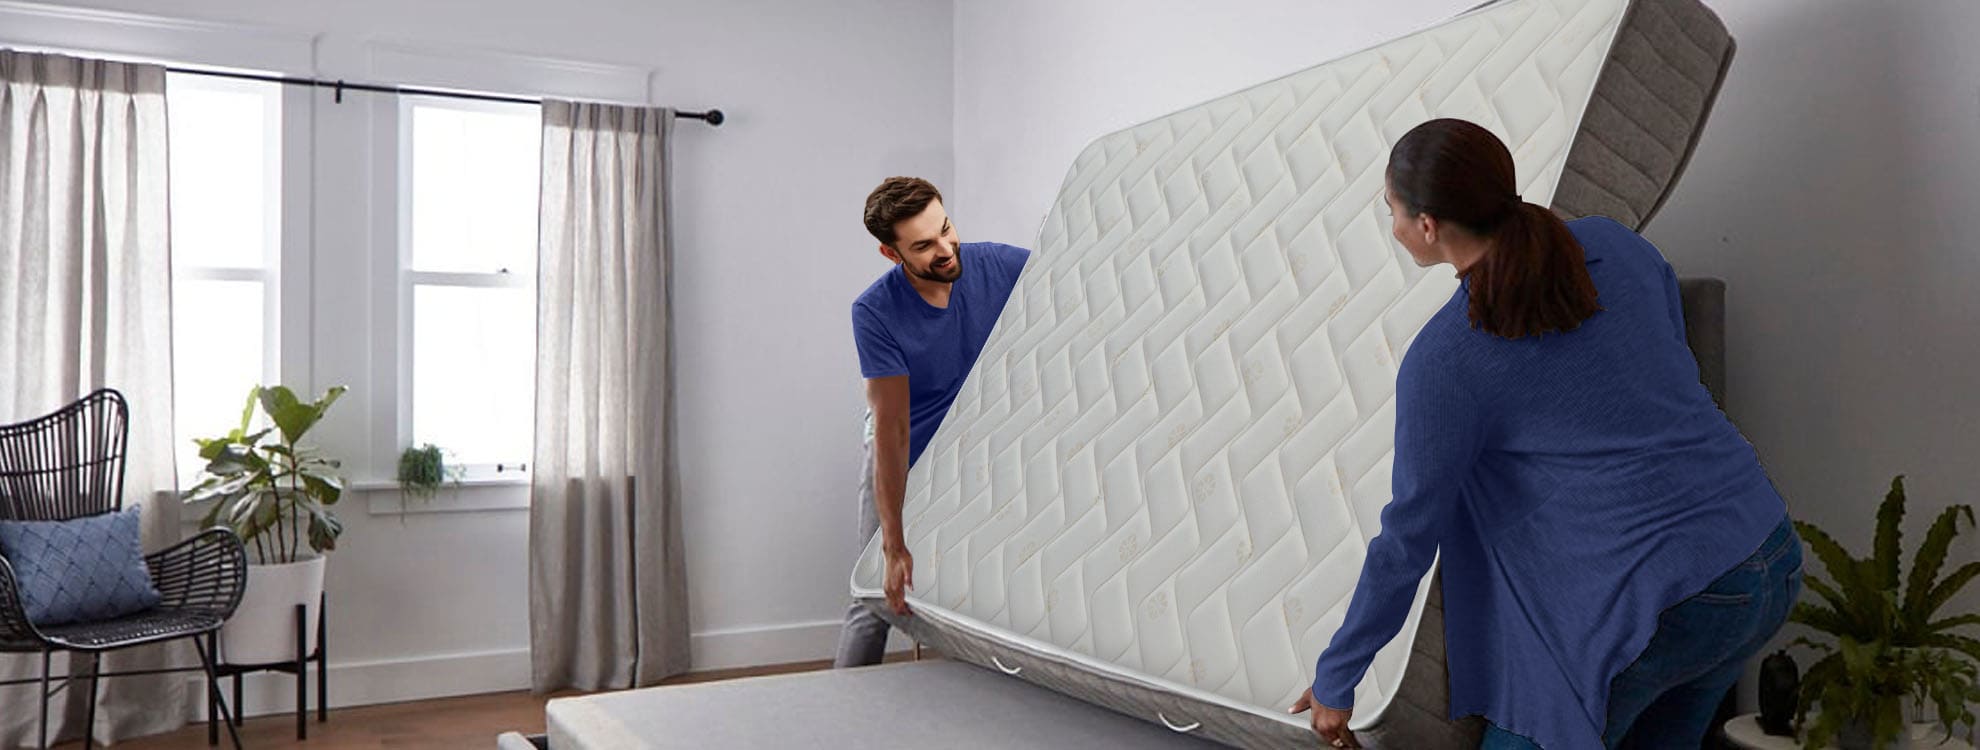 move rotate and flip your mattress